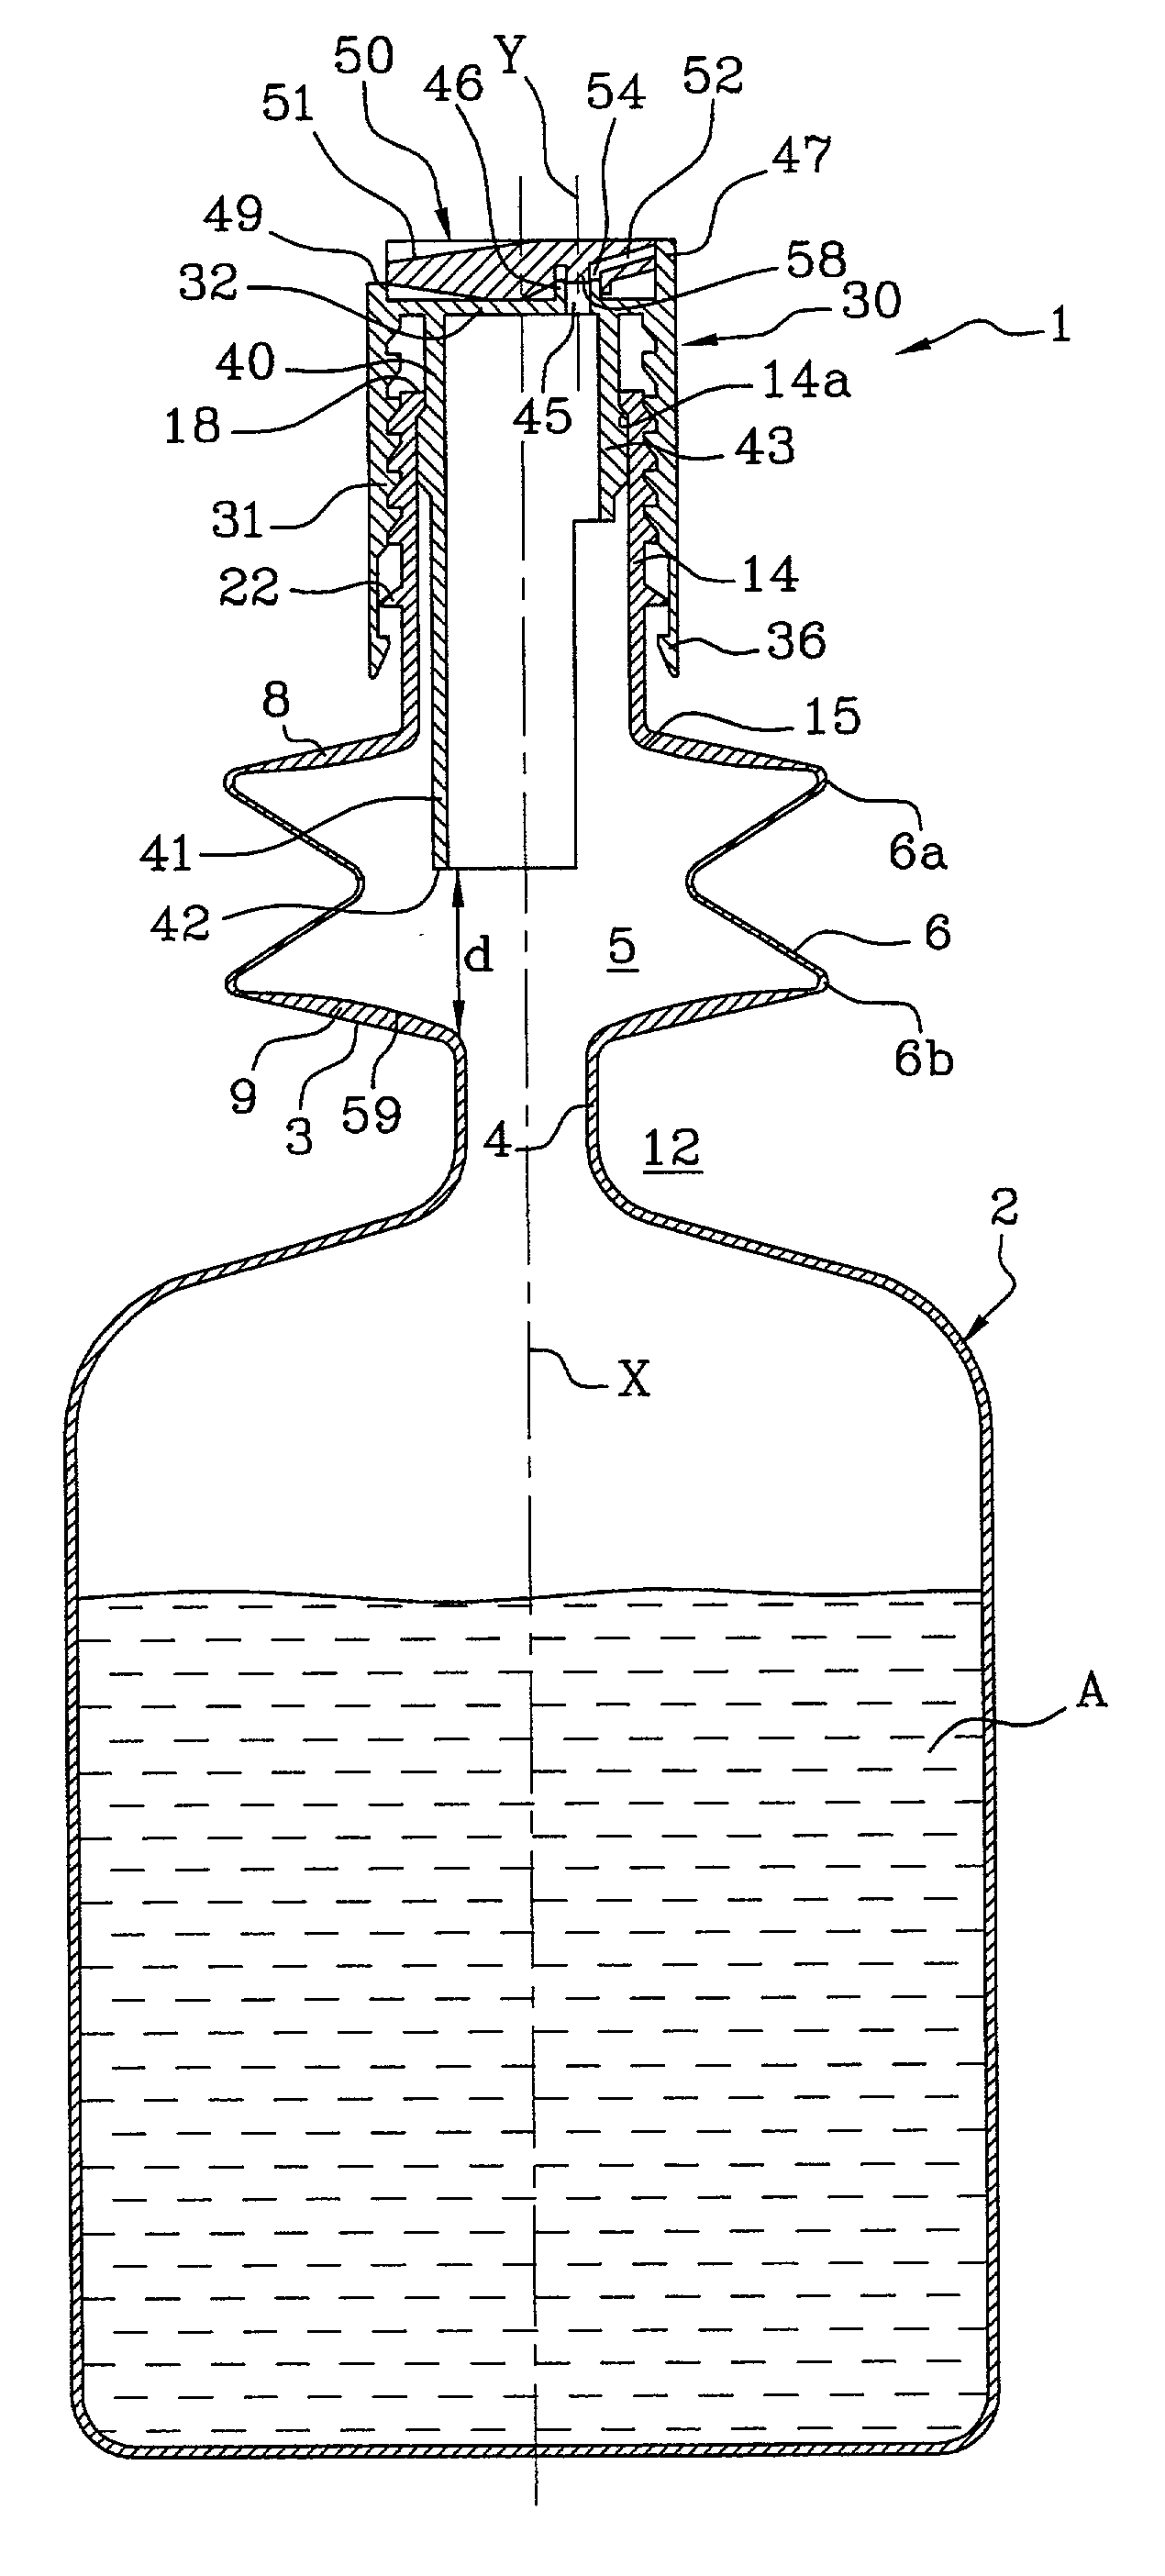 Packaging and dispenser device enabling variable quantities to be dispensed